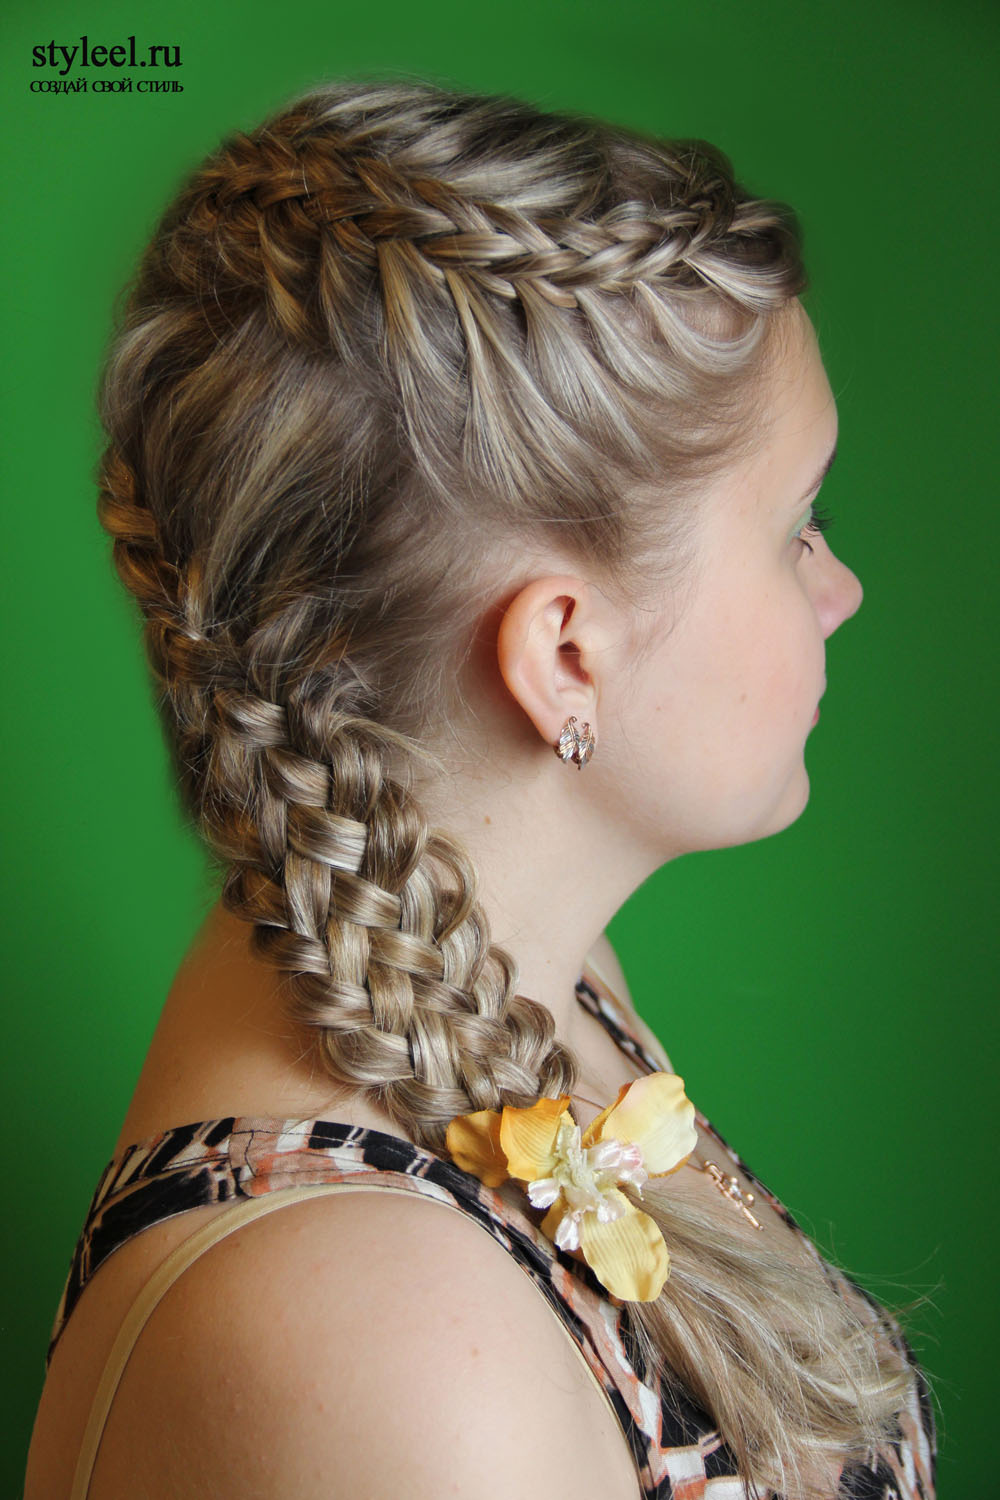 Local fashion: Forty and one braid hairstyles